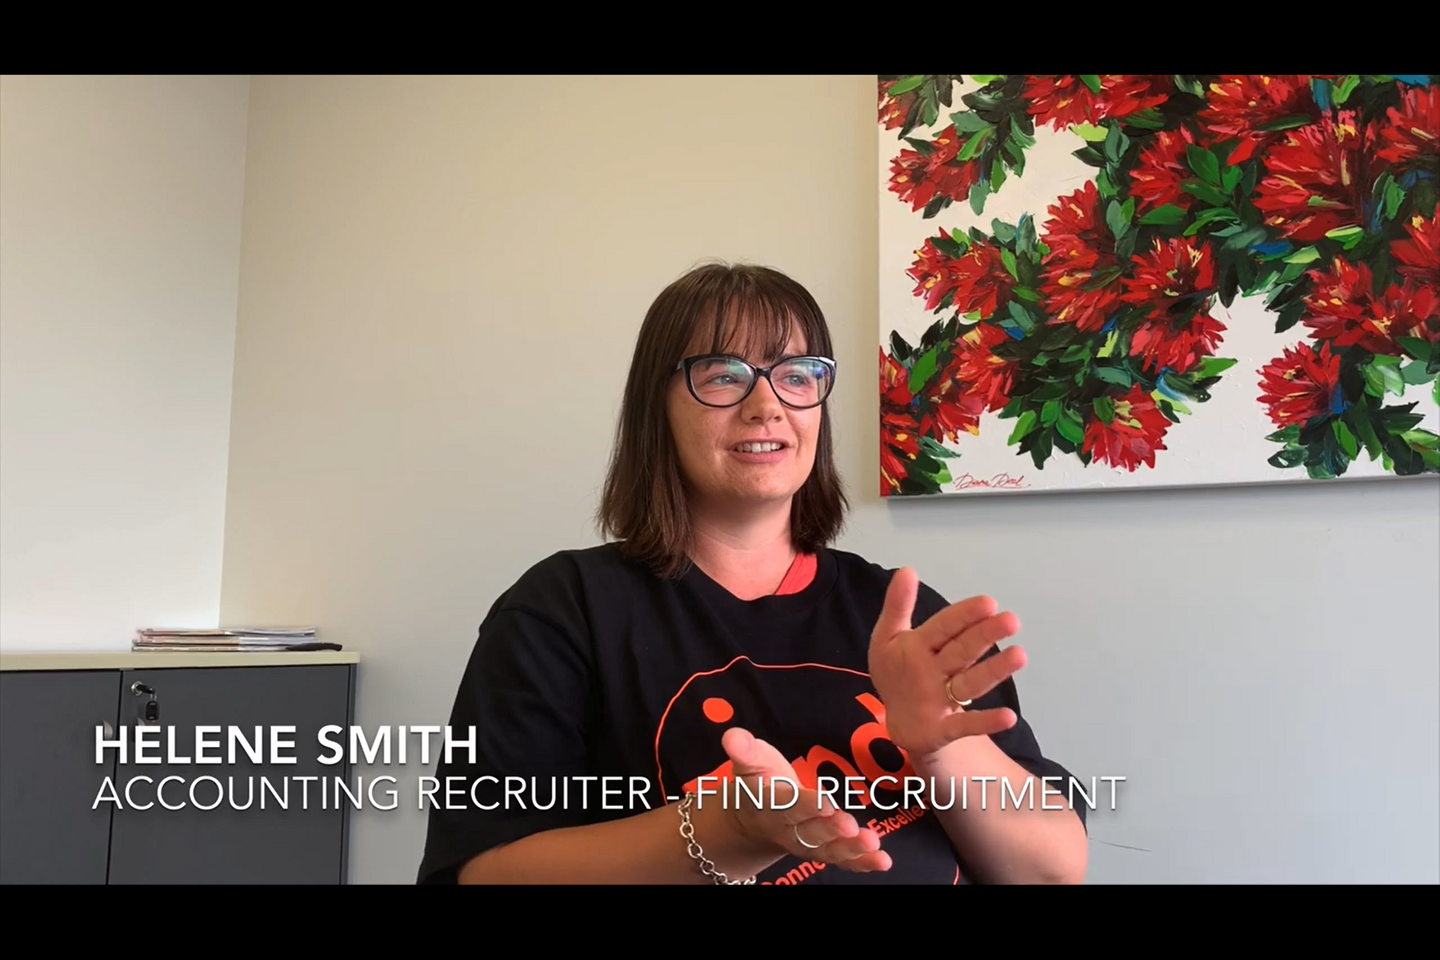 Helene Smith from Find Recruitment